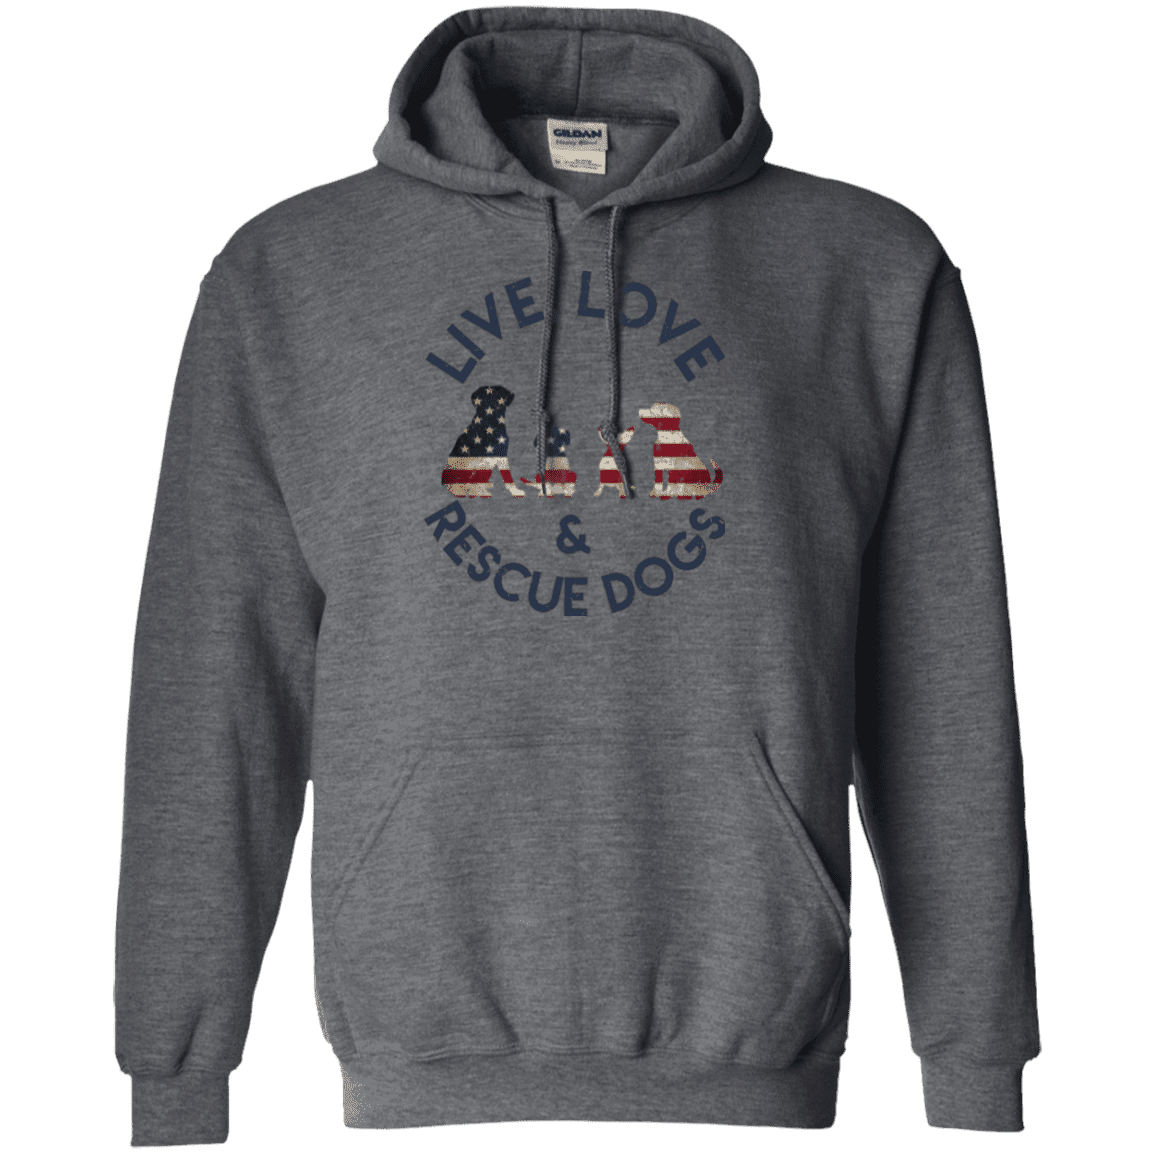 Live Love and Rescue Dogs - Hoodie.